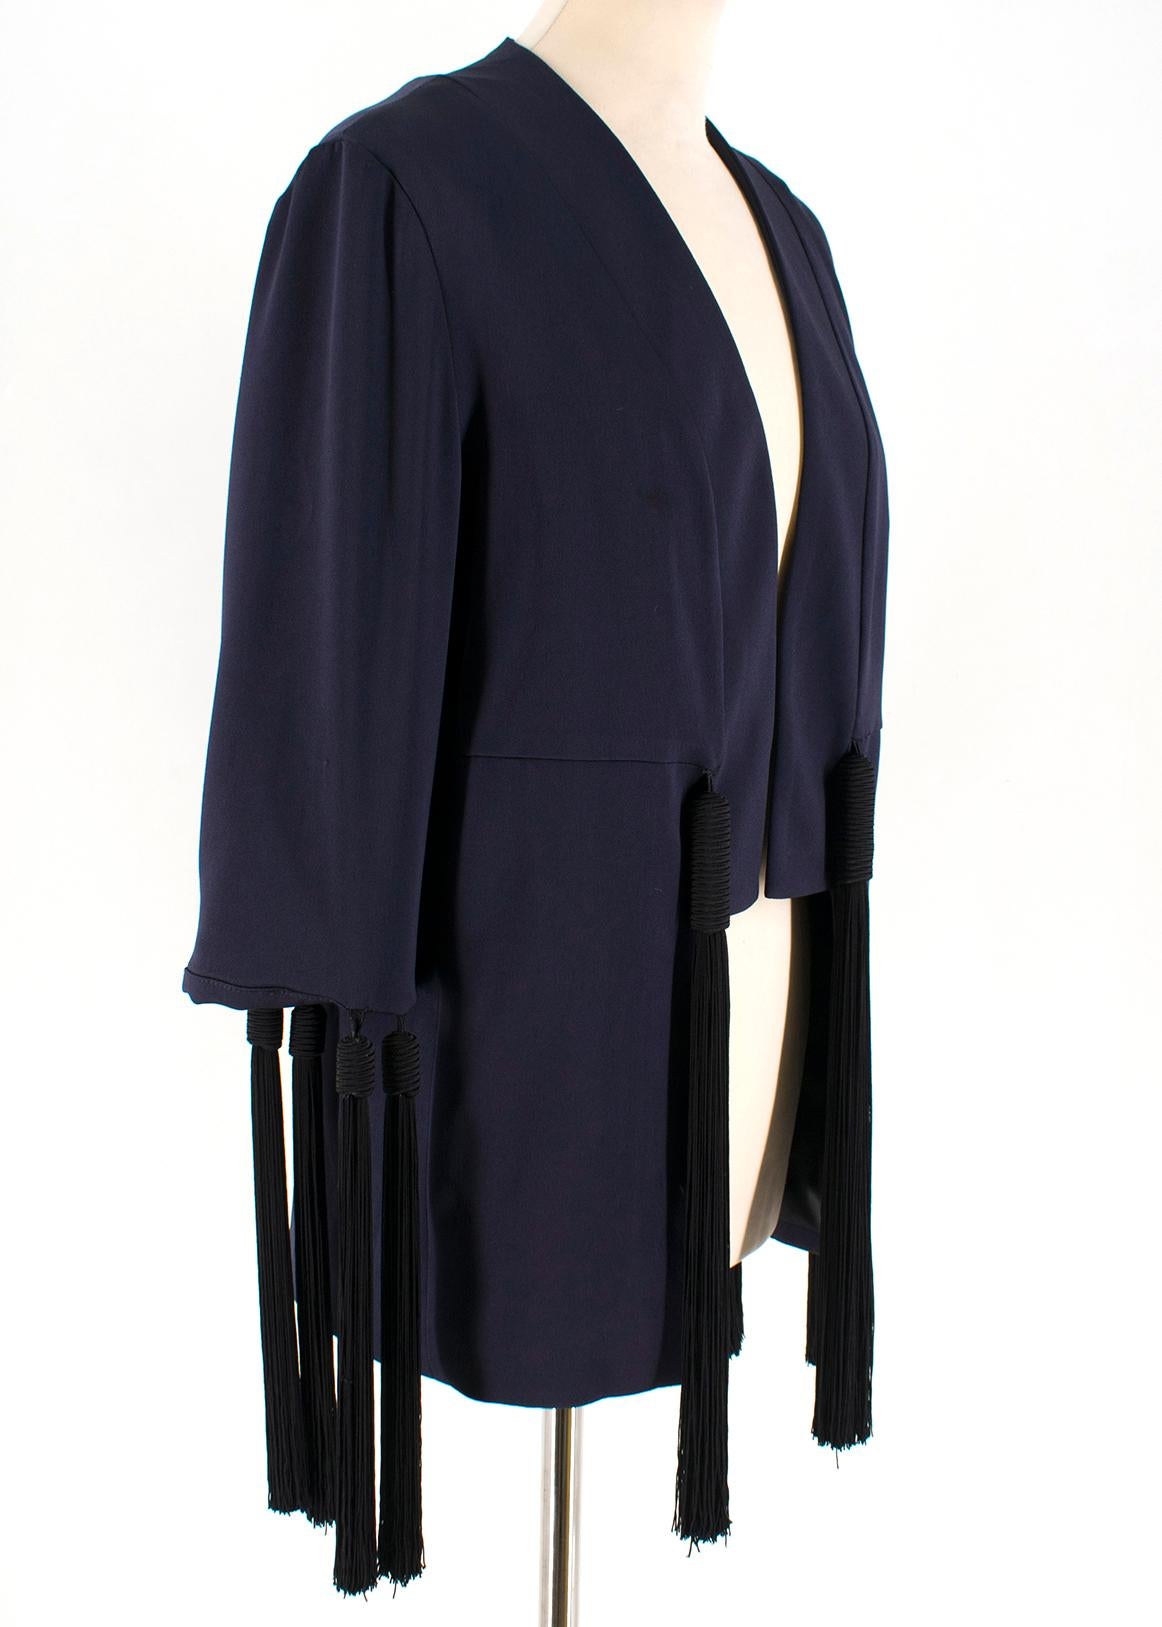 Galvan fringe navy blue jacket 

Open jacket with no closure
lining 97% polyester 3% elastane;
12 black fringe application;
Made in England 

approx
Measurements are taken laying flat, seam to seam. 
shoulders 40 cm
sleeve length 40 cm
chest 50